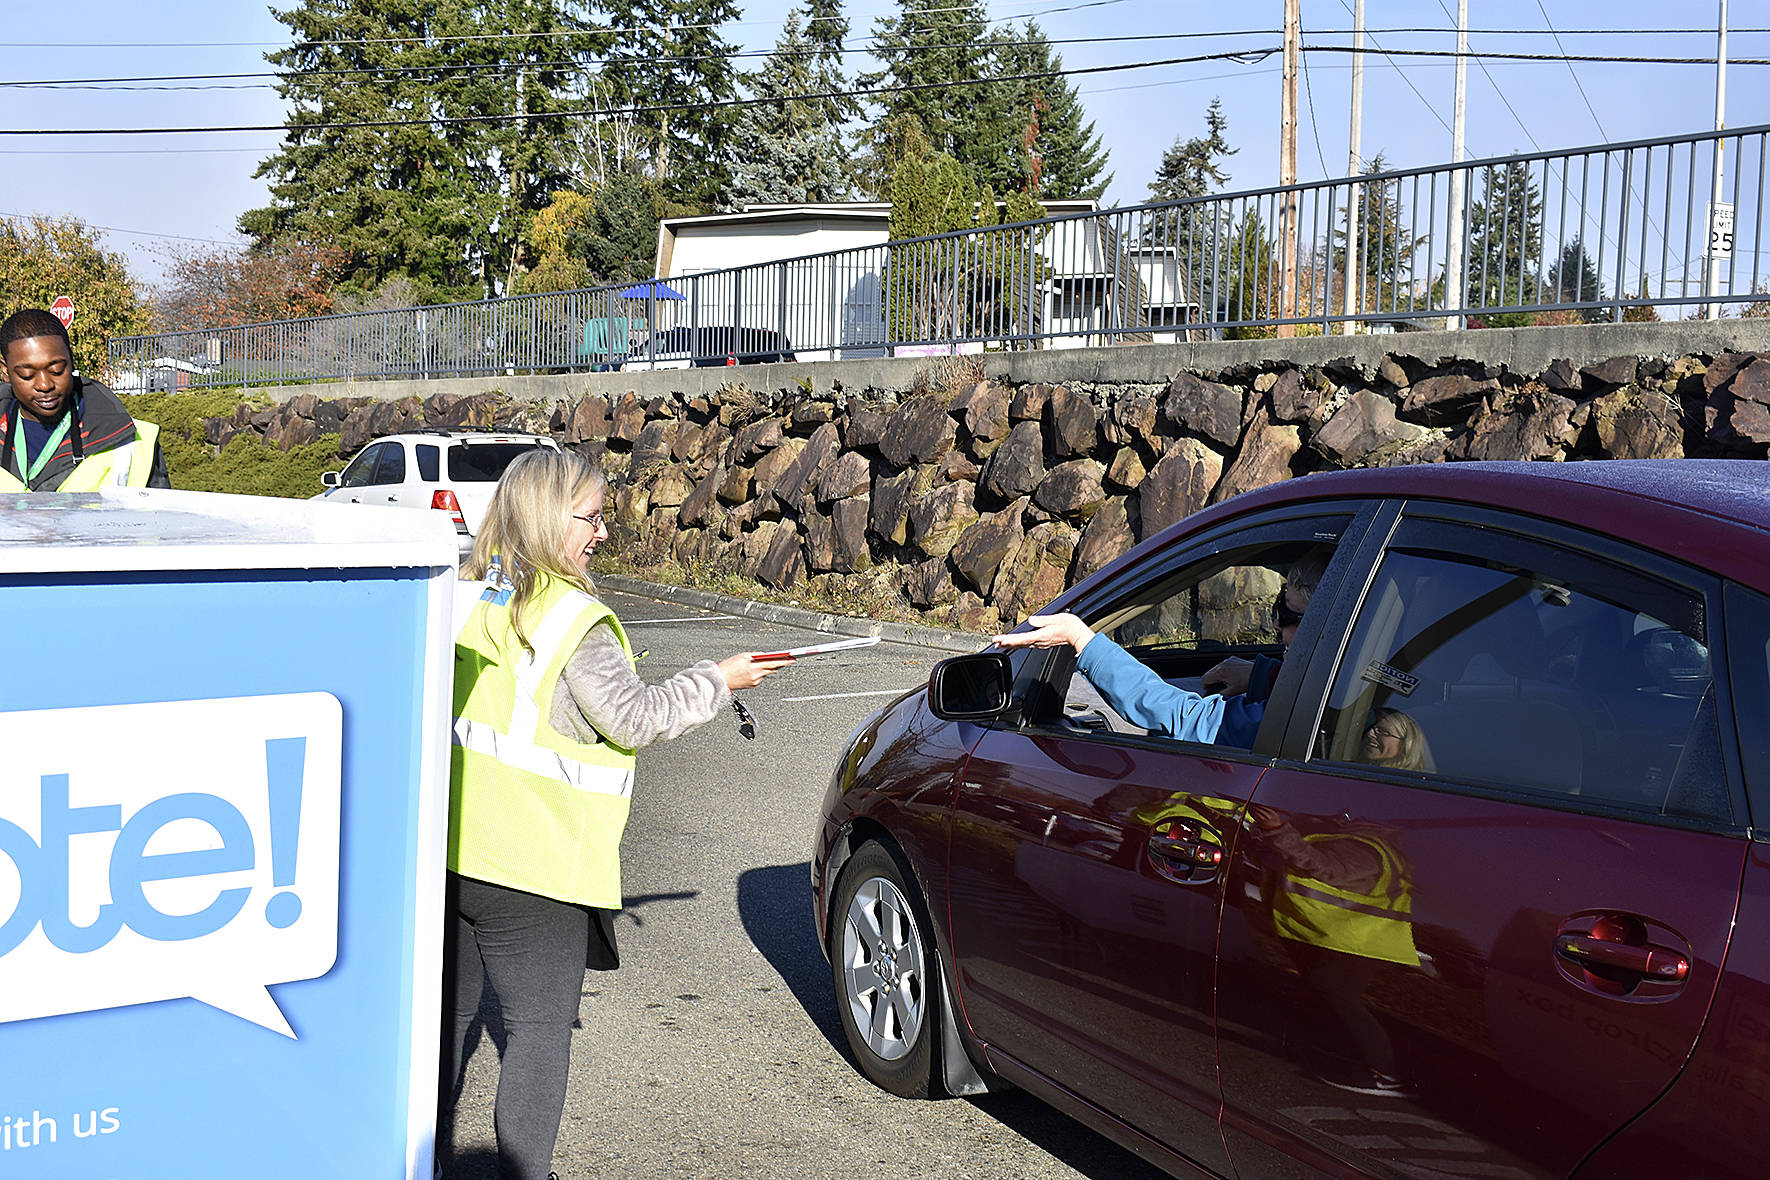 Photo by Haley Ausbun. Election Day in Renton, Nov. 5 2019. Election Office staff take a ballot from a drive-by voter.